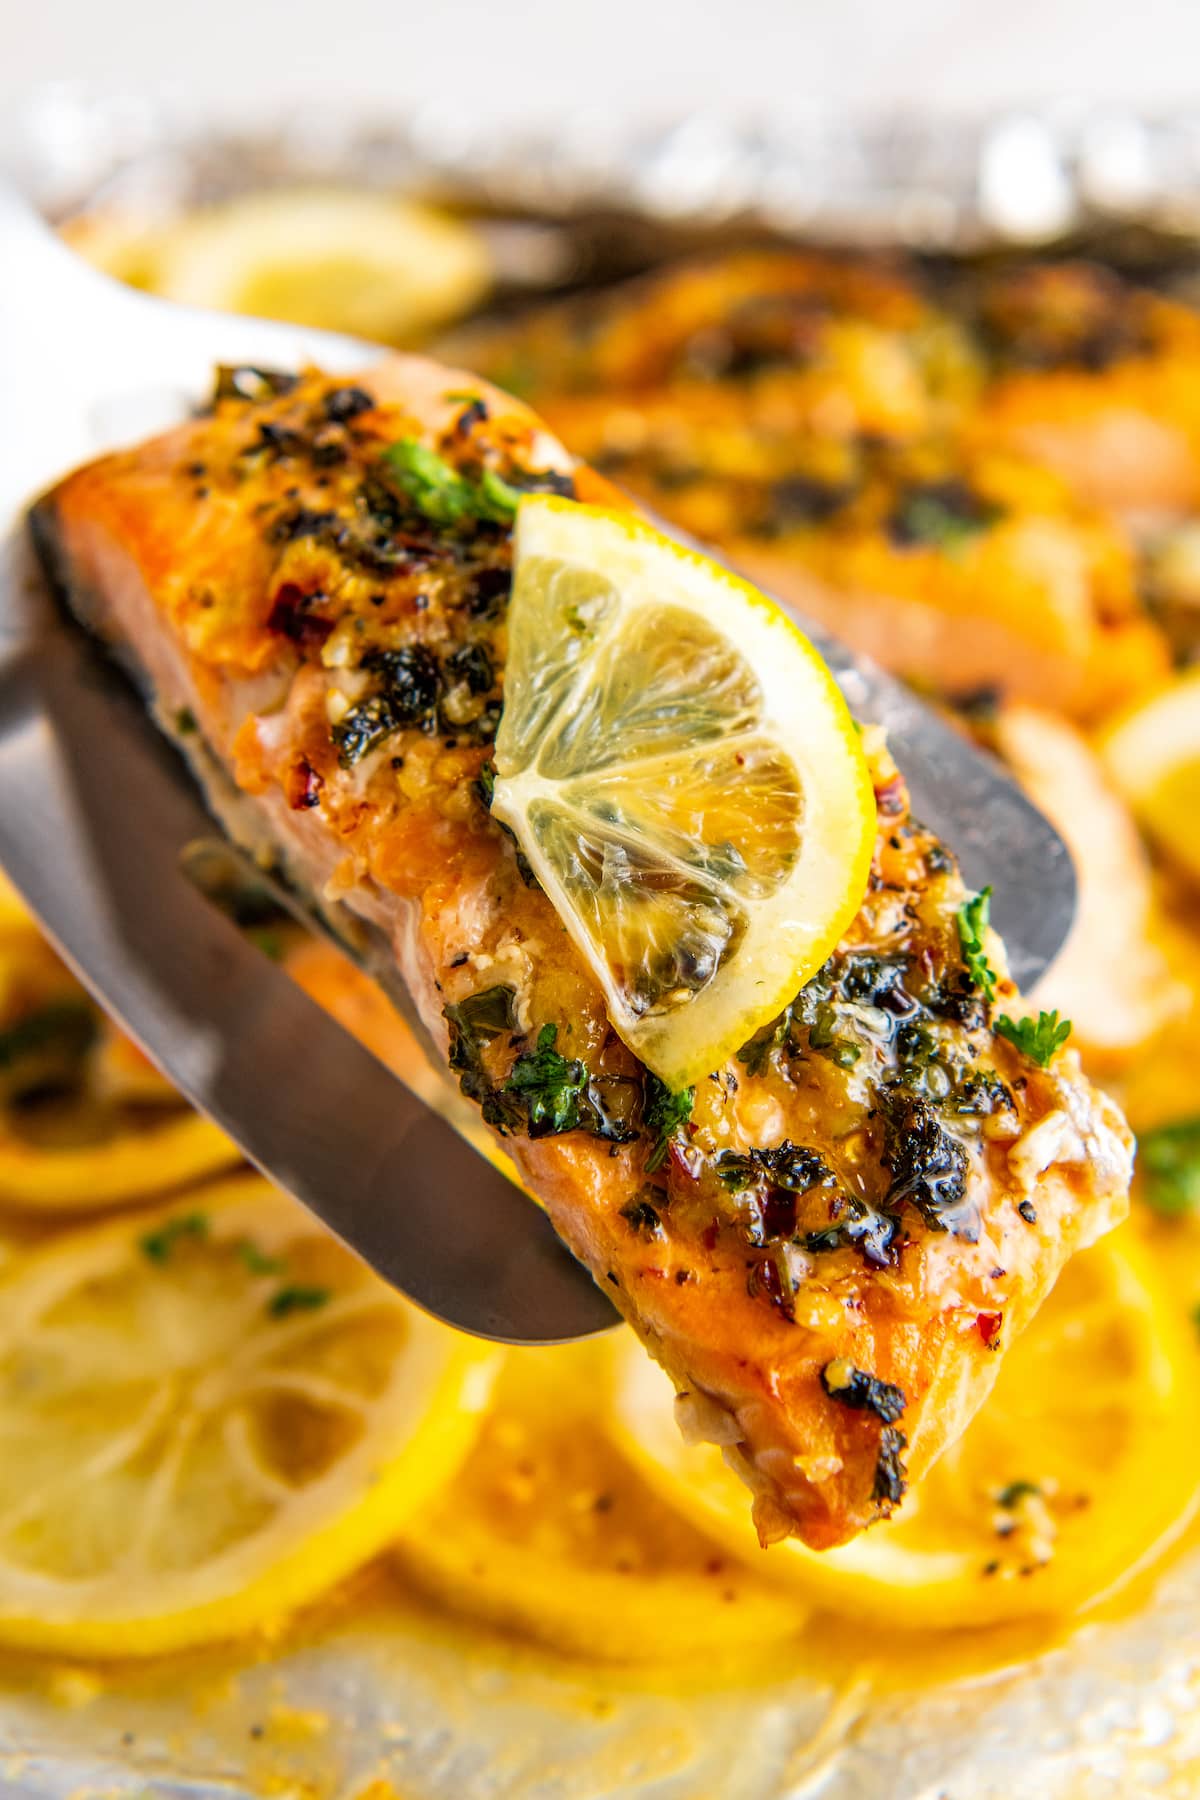 A salmon fillet on a spatula, topped with parsley and lemon, with more fillets and lemons in the background.